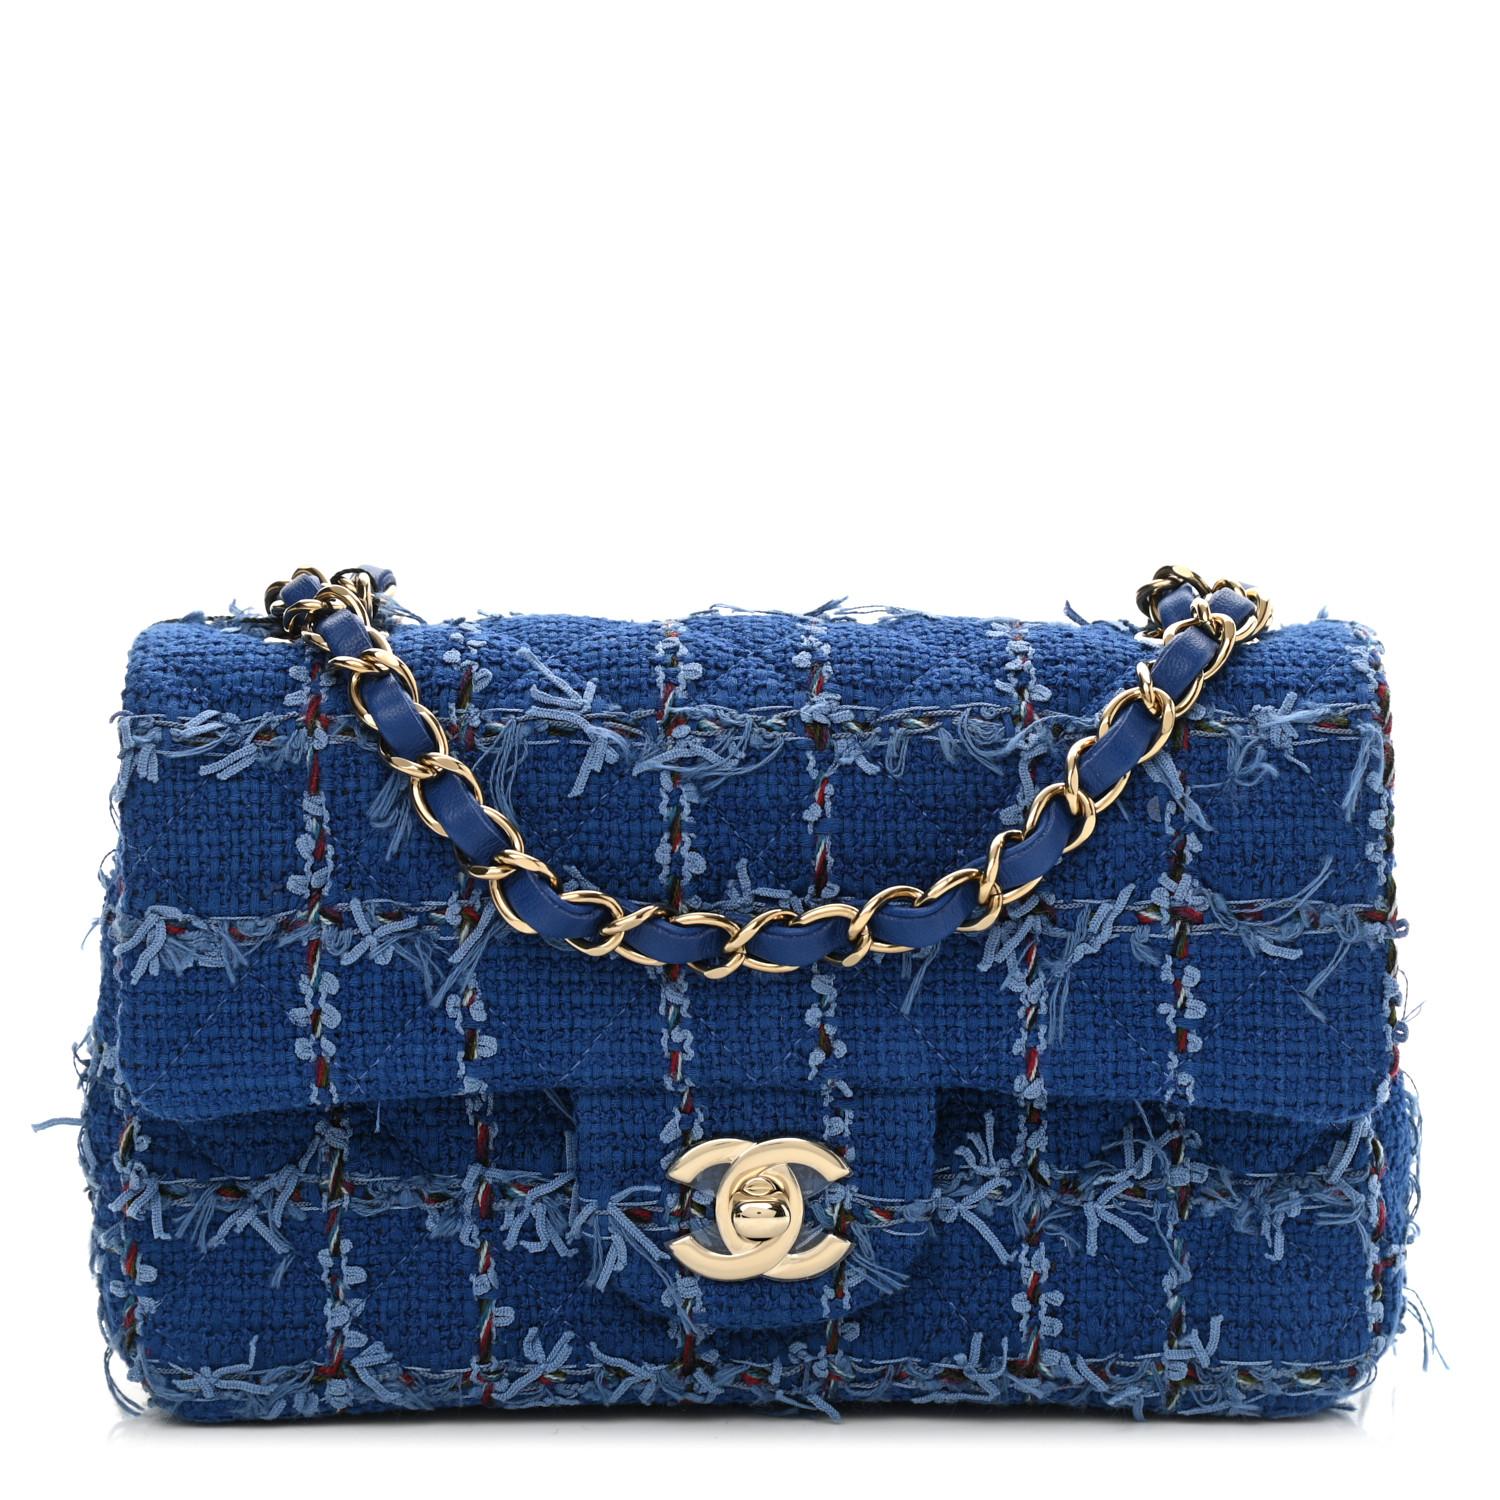 Chanel Blue Tweed Quilted Small Mini Classic Flap Bag In New Condition For Sale In Miami, FL